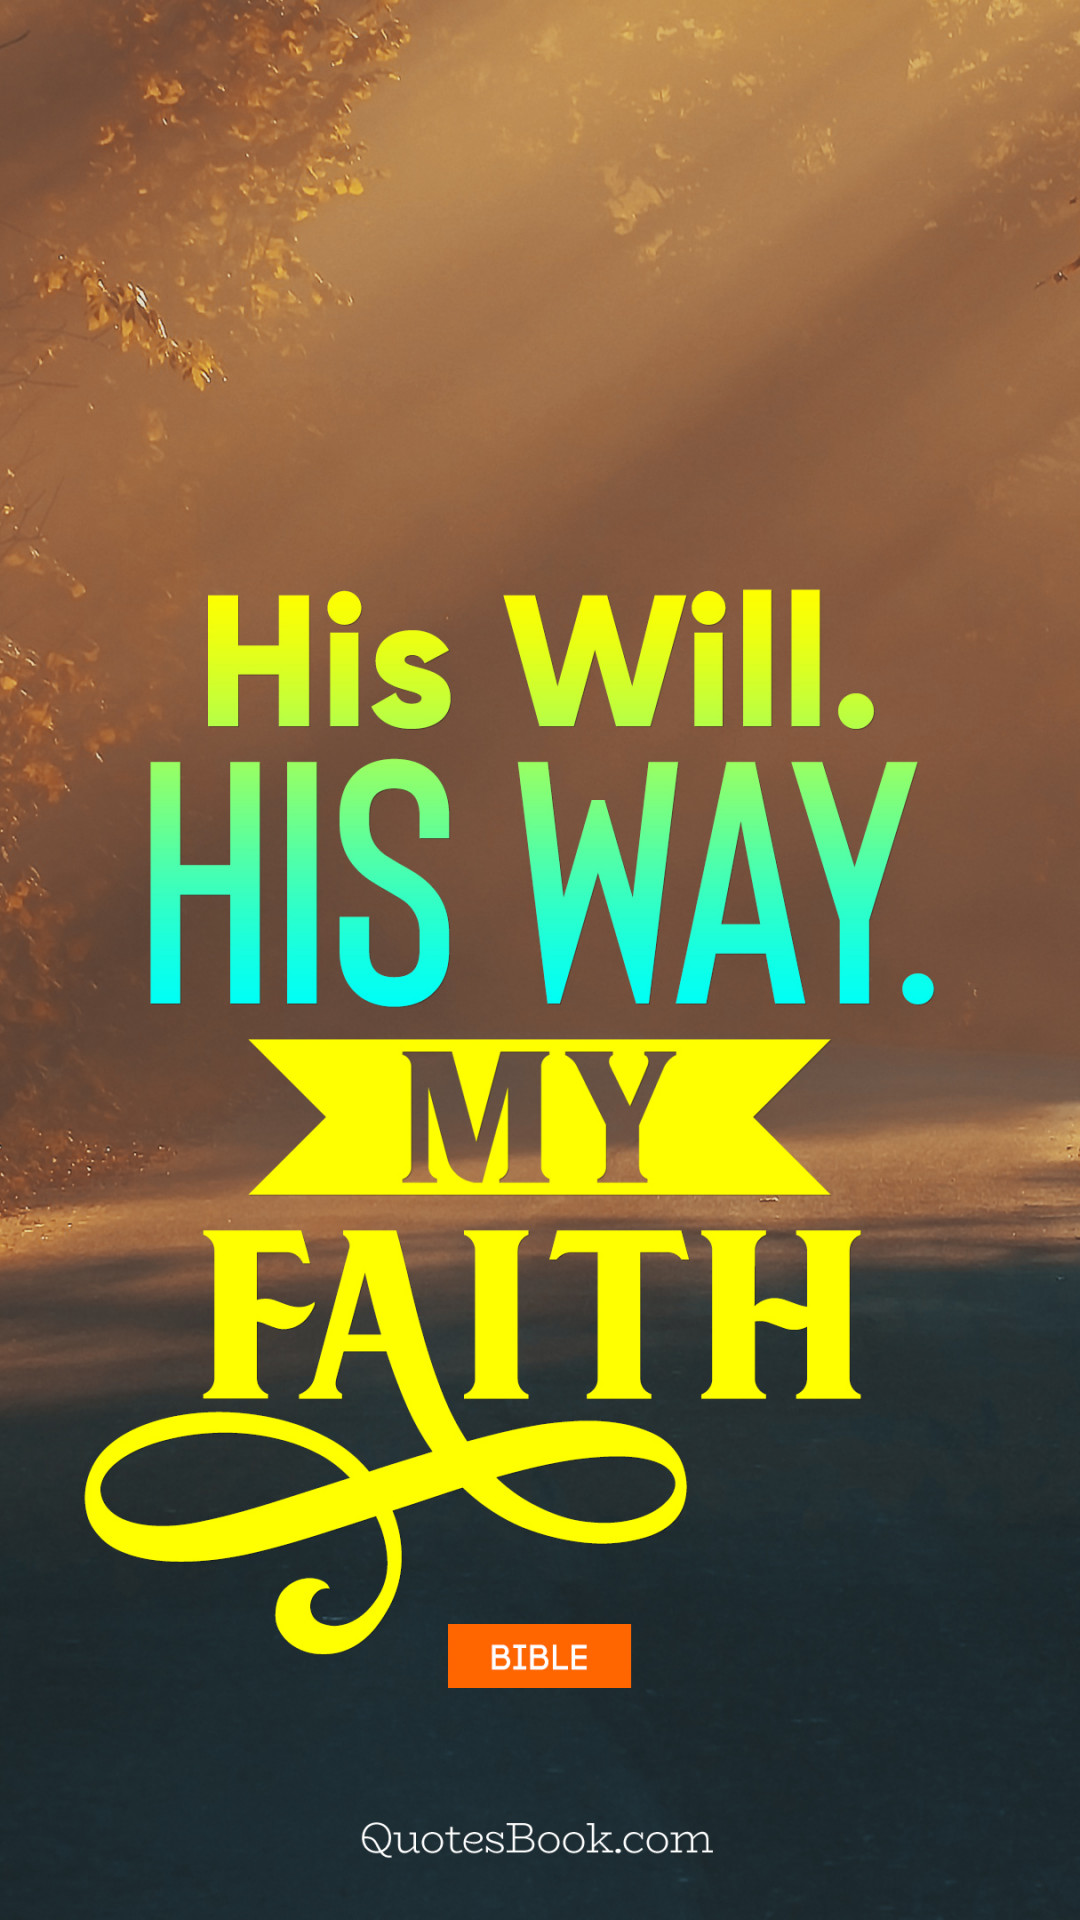 His will. His way. My faith. - Quote by Bible - QuotesBook